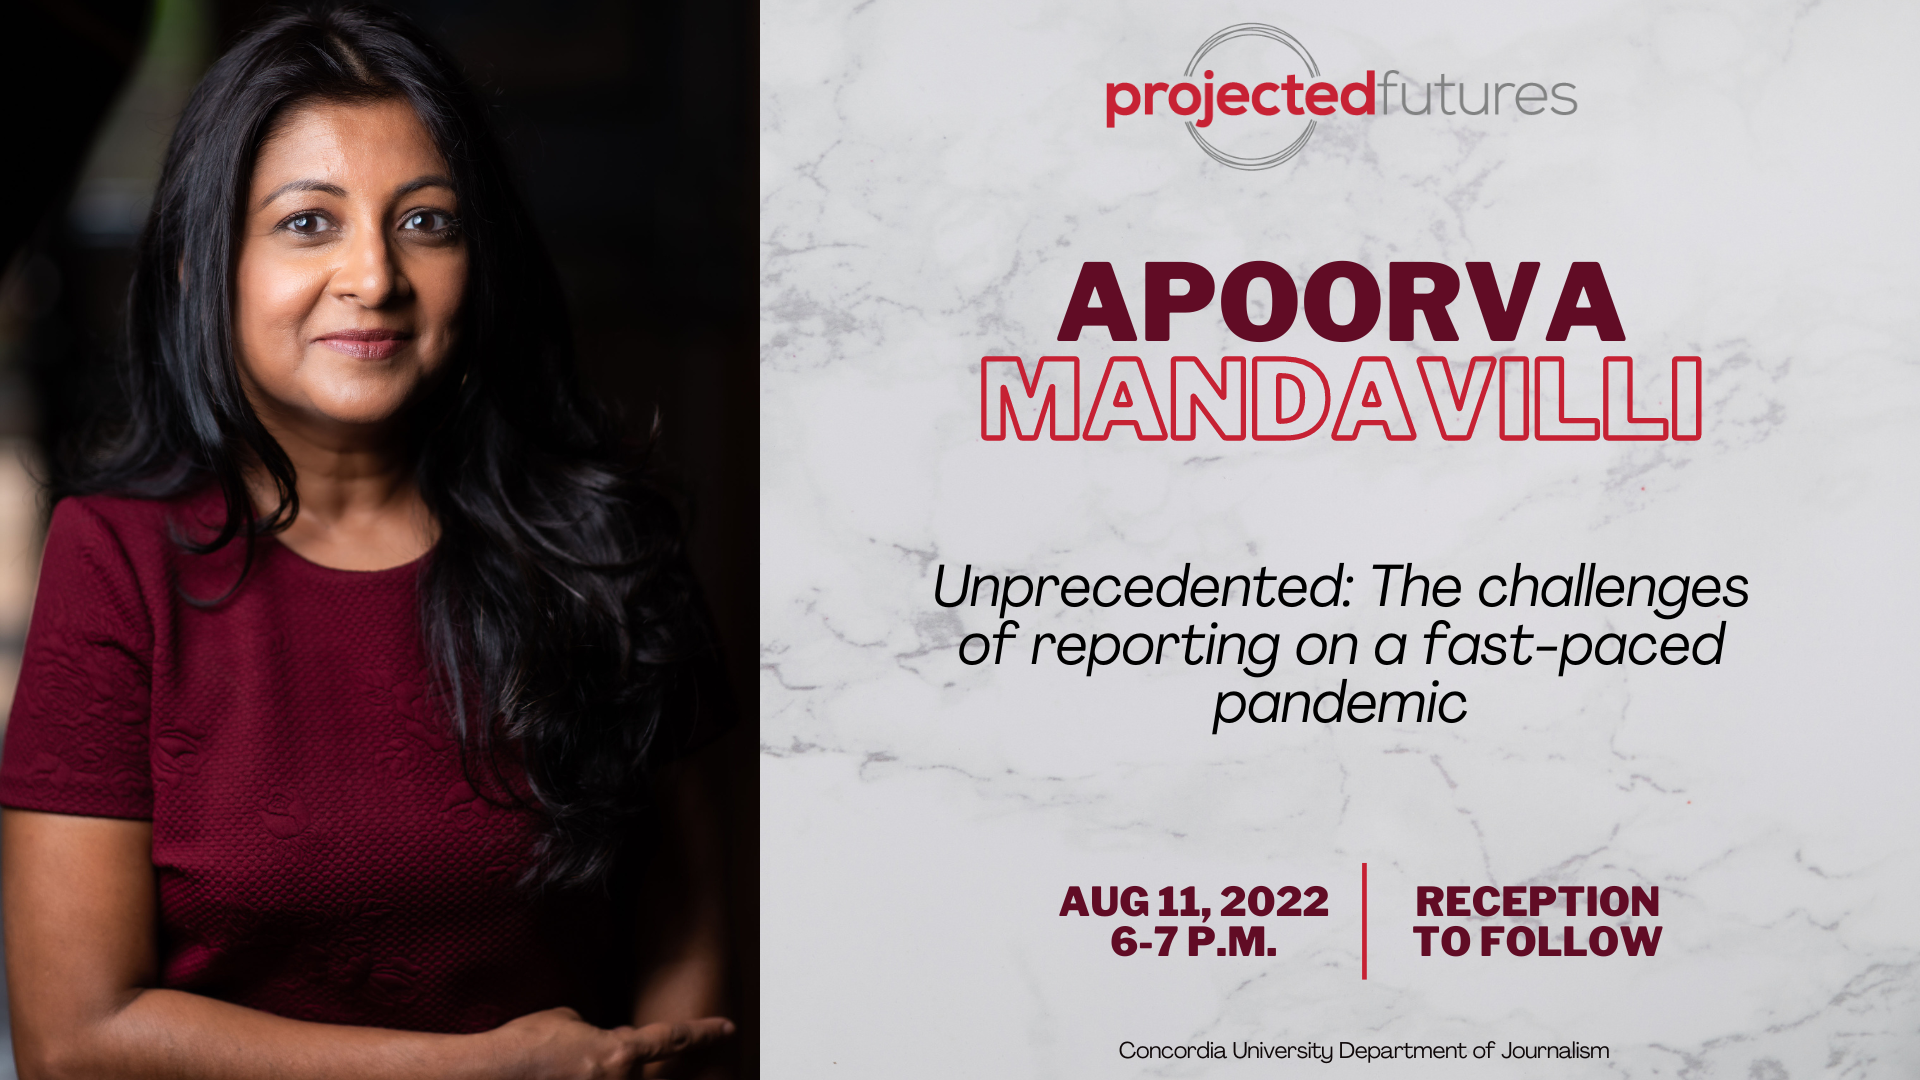 Event poster for Apoorva Mandavilli's talk, with her portrait and title of the event